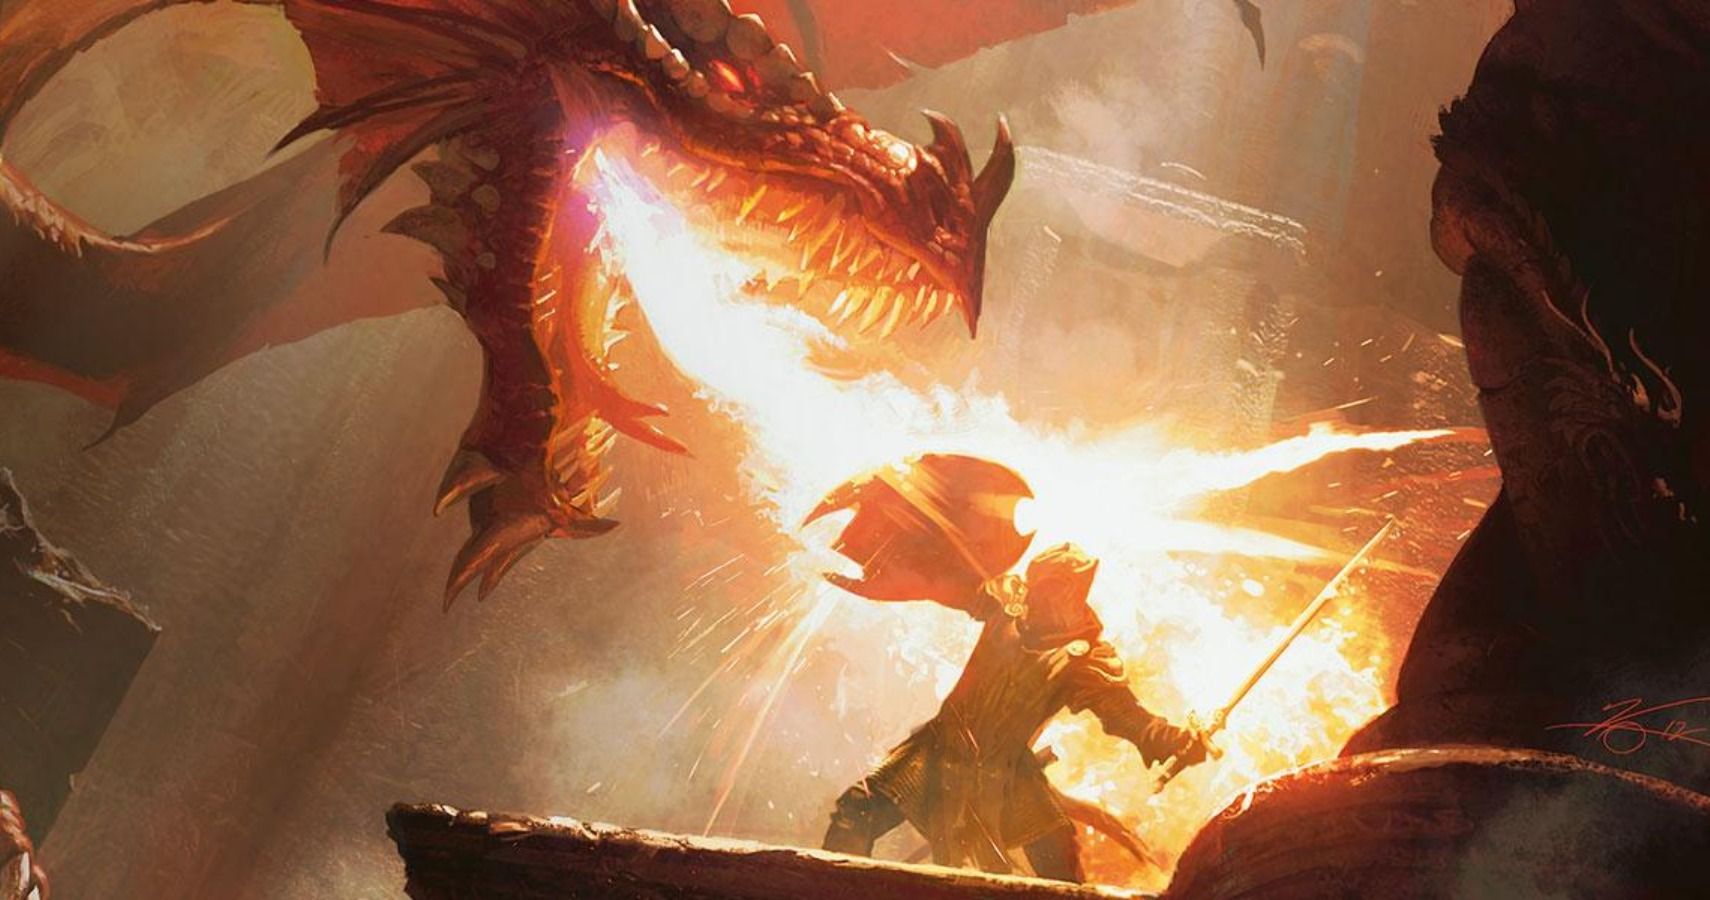 New Dungeons & Dragons Book Reveal Delayed